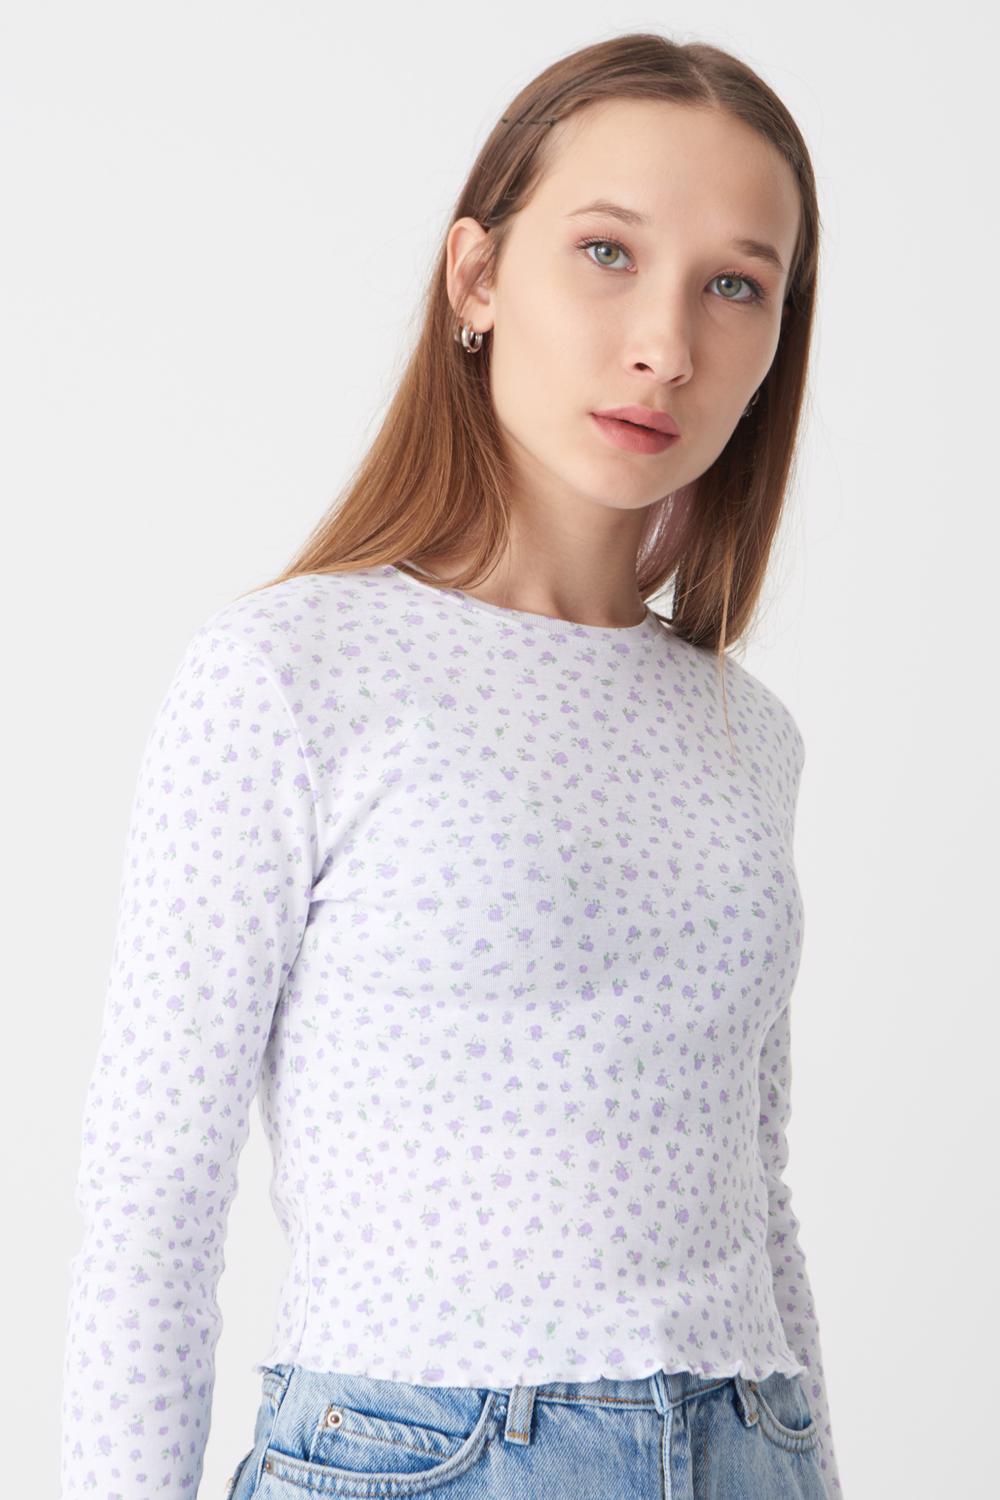 Lilac Floral Printed Long Sleeve Top